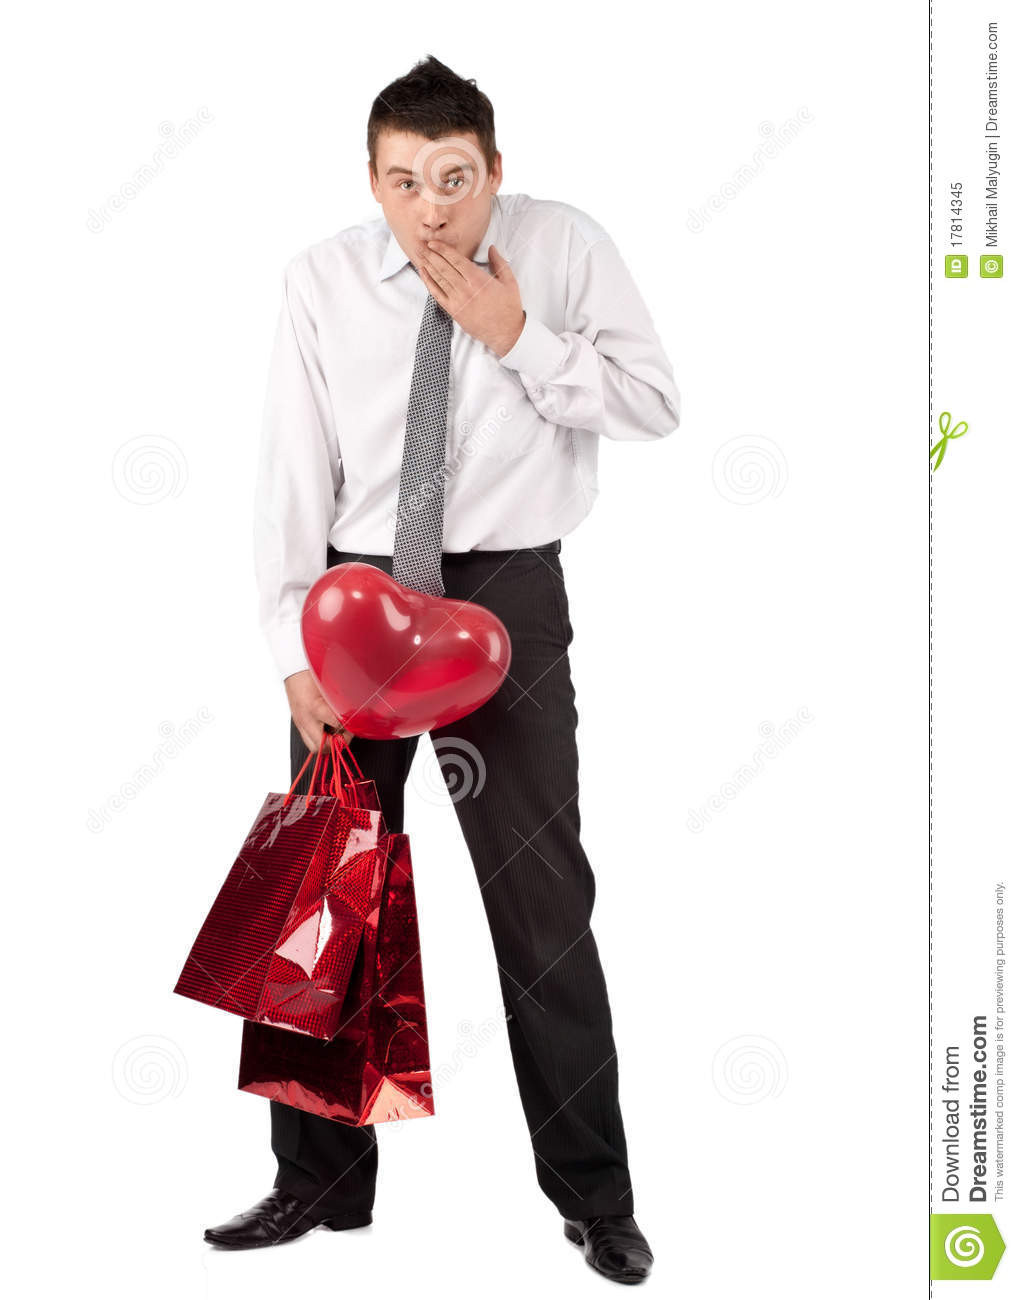 Man Valentines Day Gifts
 Man With Gifts For Valentine s Day Stock Image Image